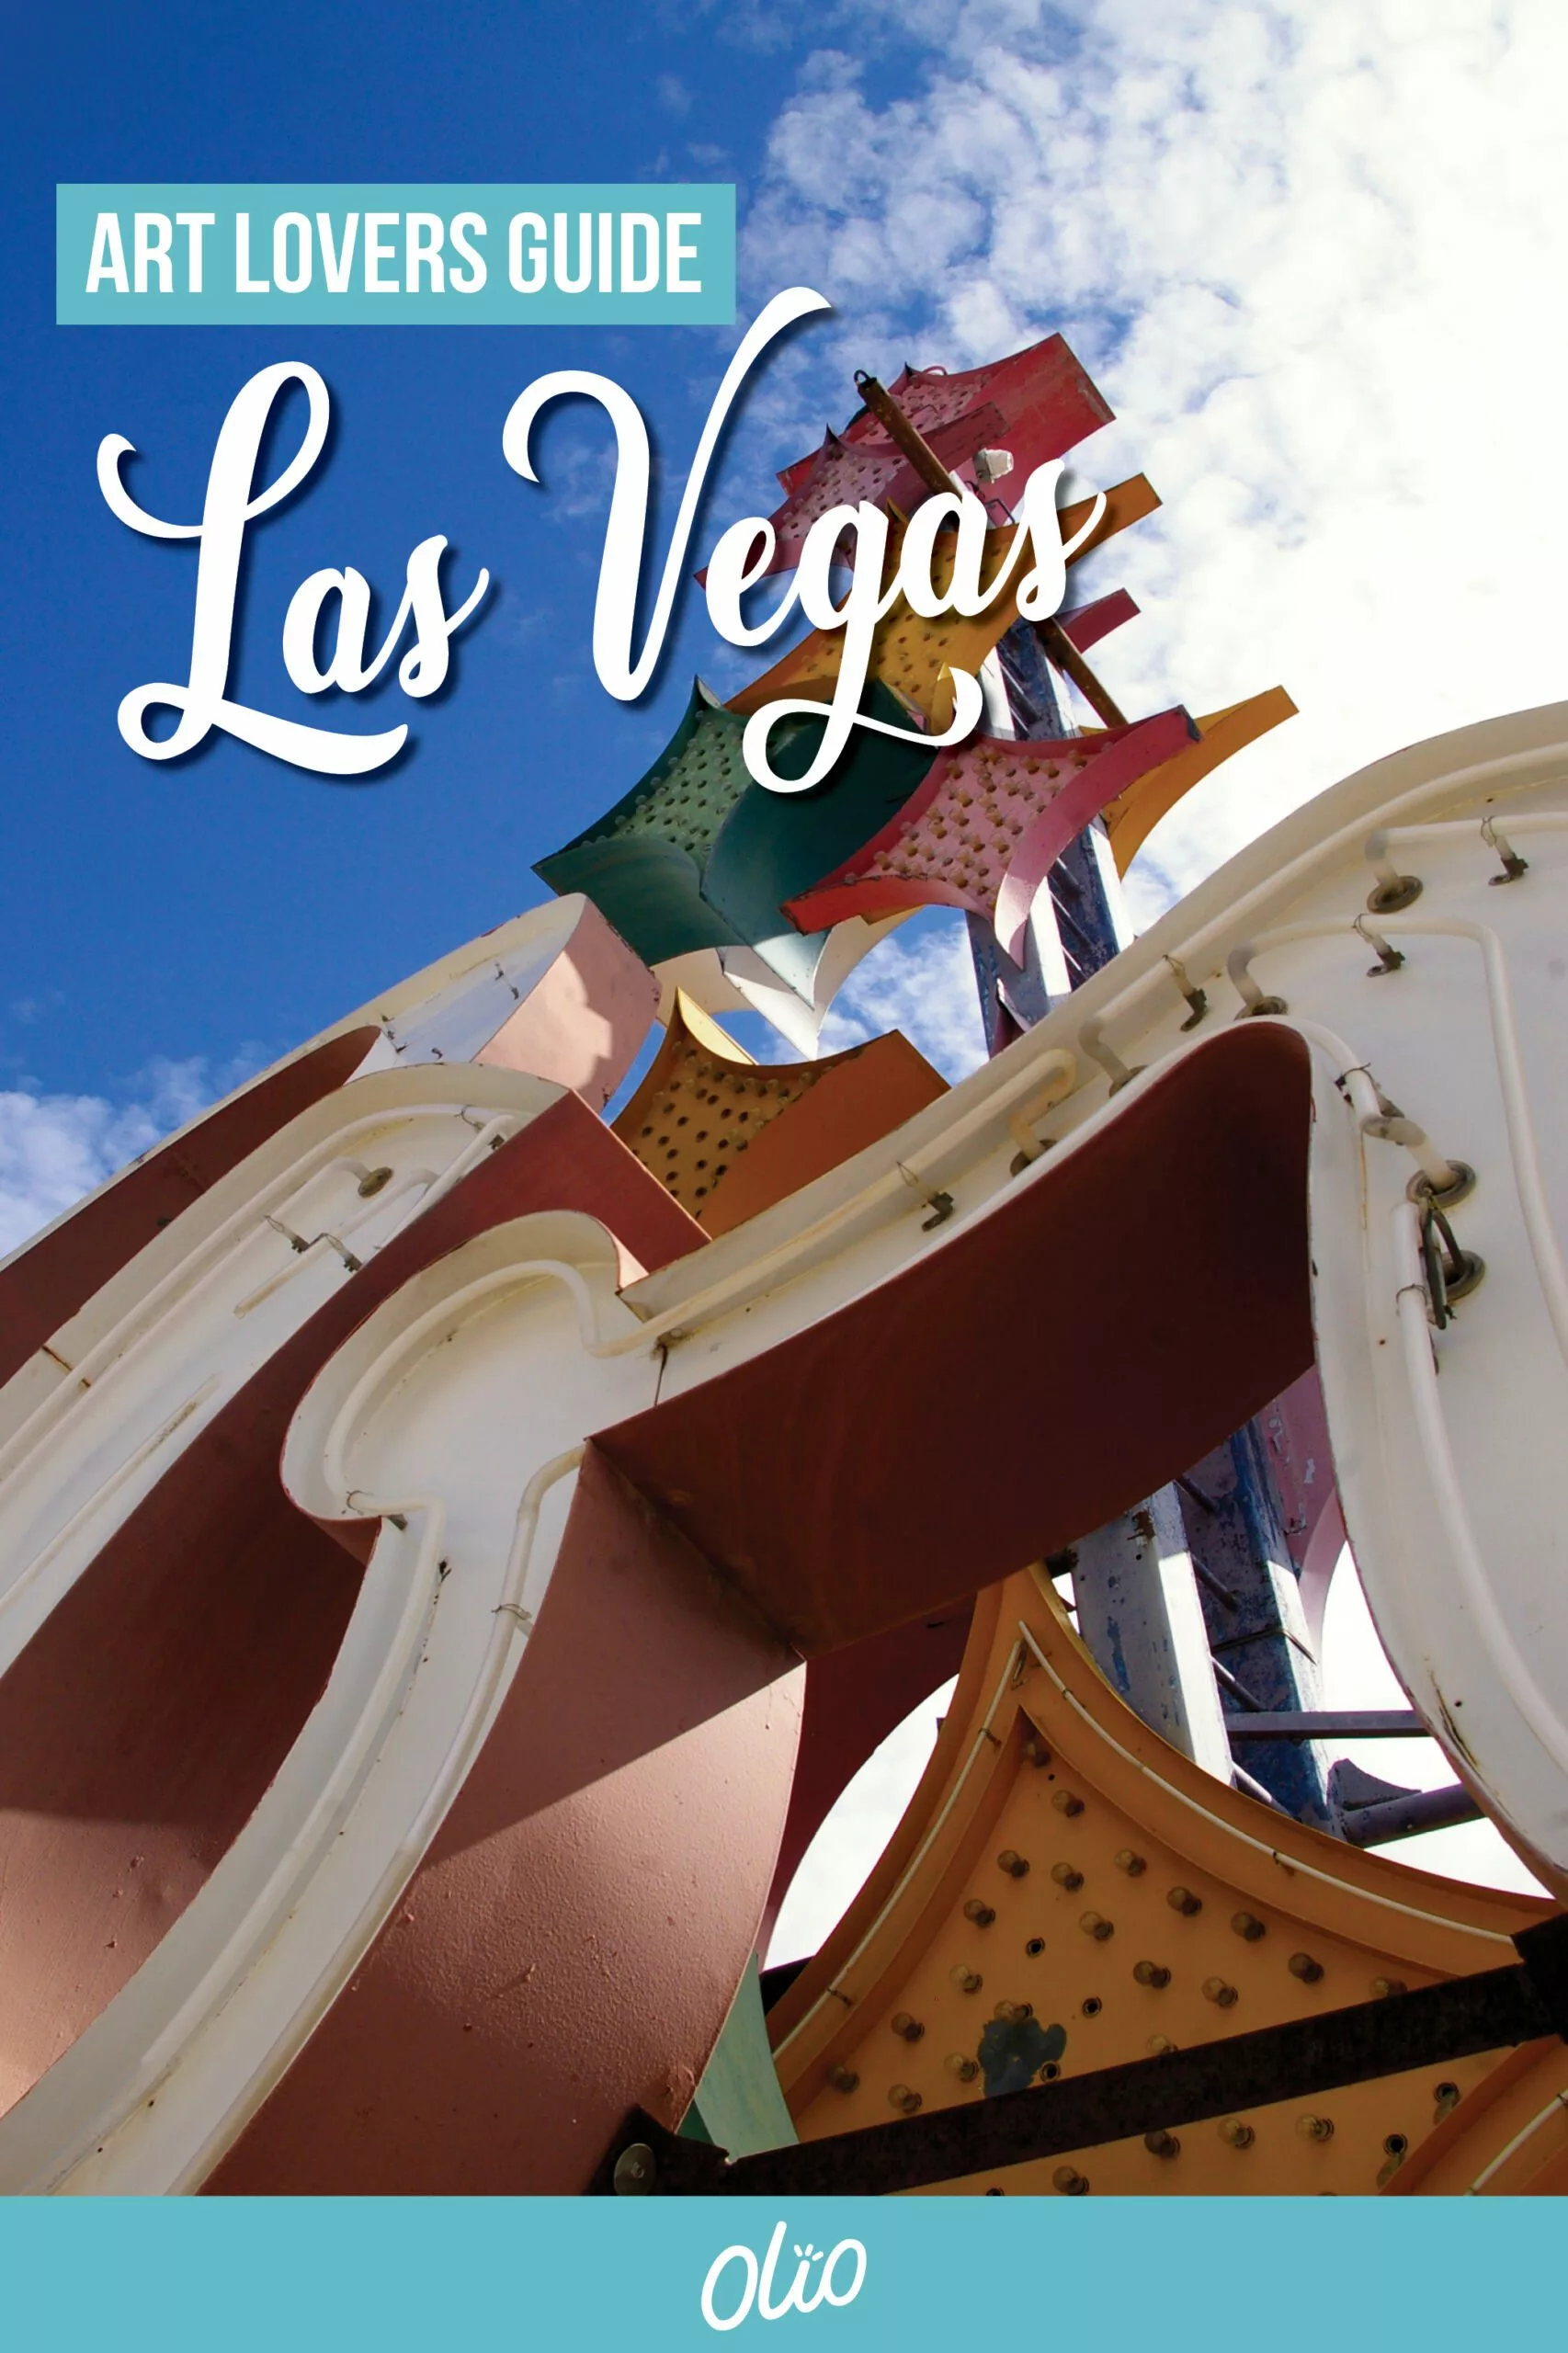 It may not be what immediately comes to mind when you think of Sin City, but there are lots places in Las Vegas for art lovers! From a museum of vintage neon signs to brightly colored installations like Seven Magic Mountains, there are lots of creative places to explore. #Art #LasVegas #Nevada